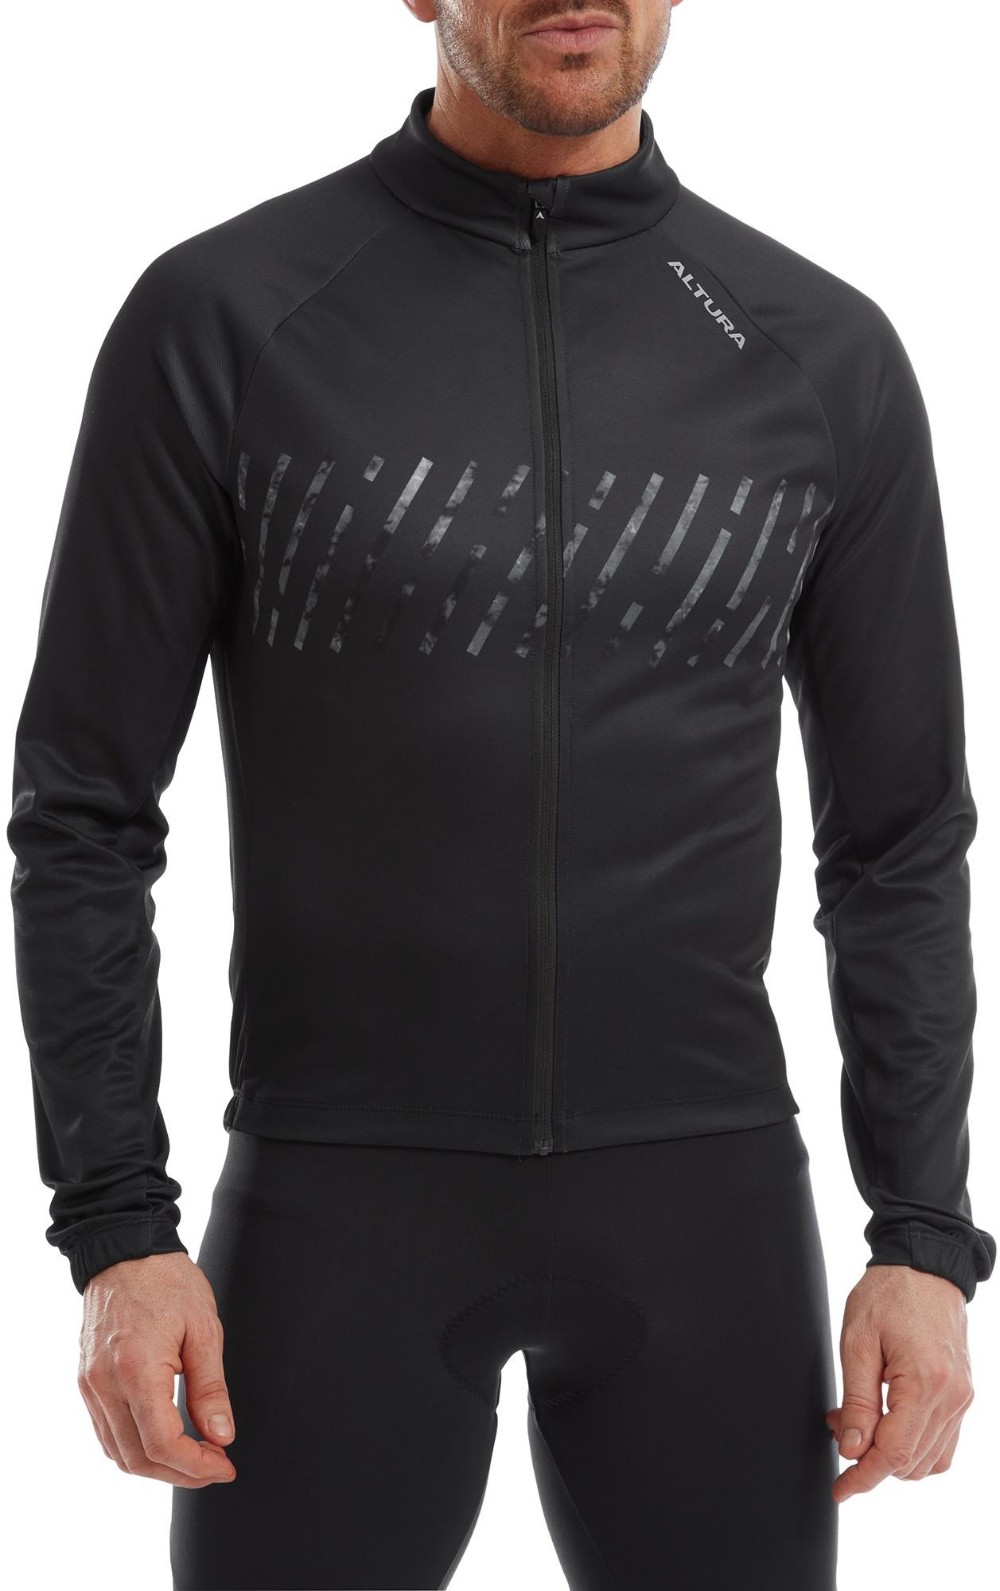 Airstream Long Sleeve Jersey image 0